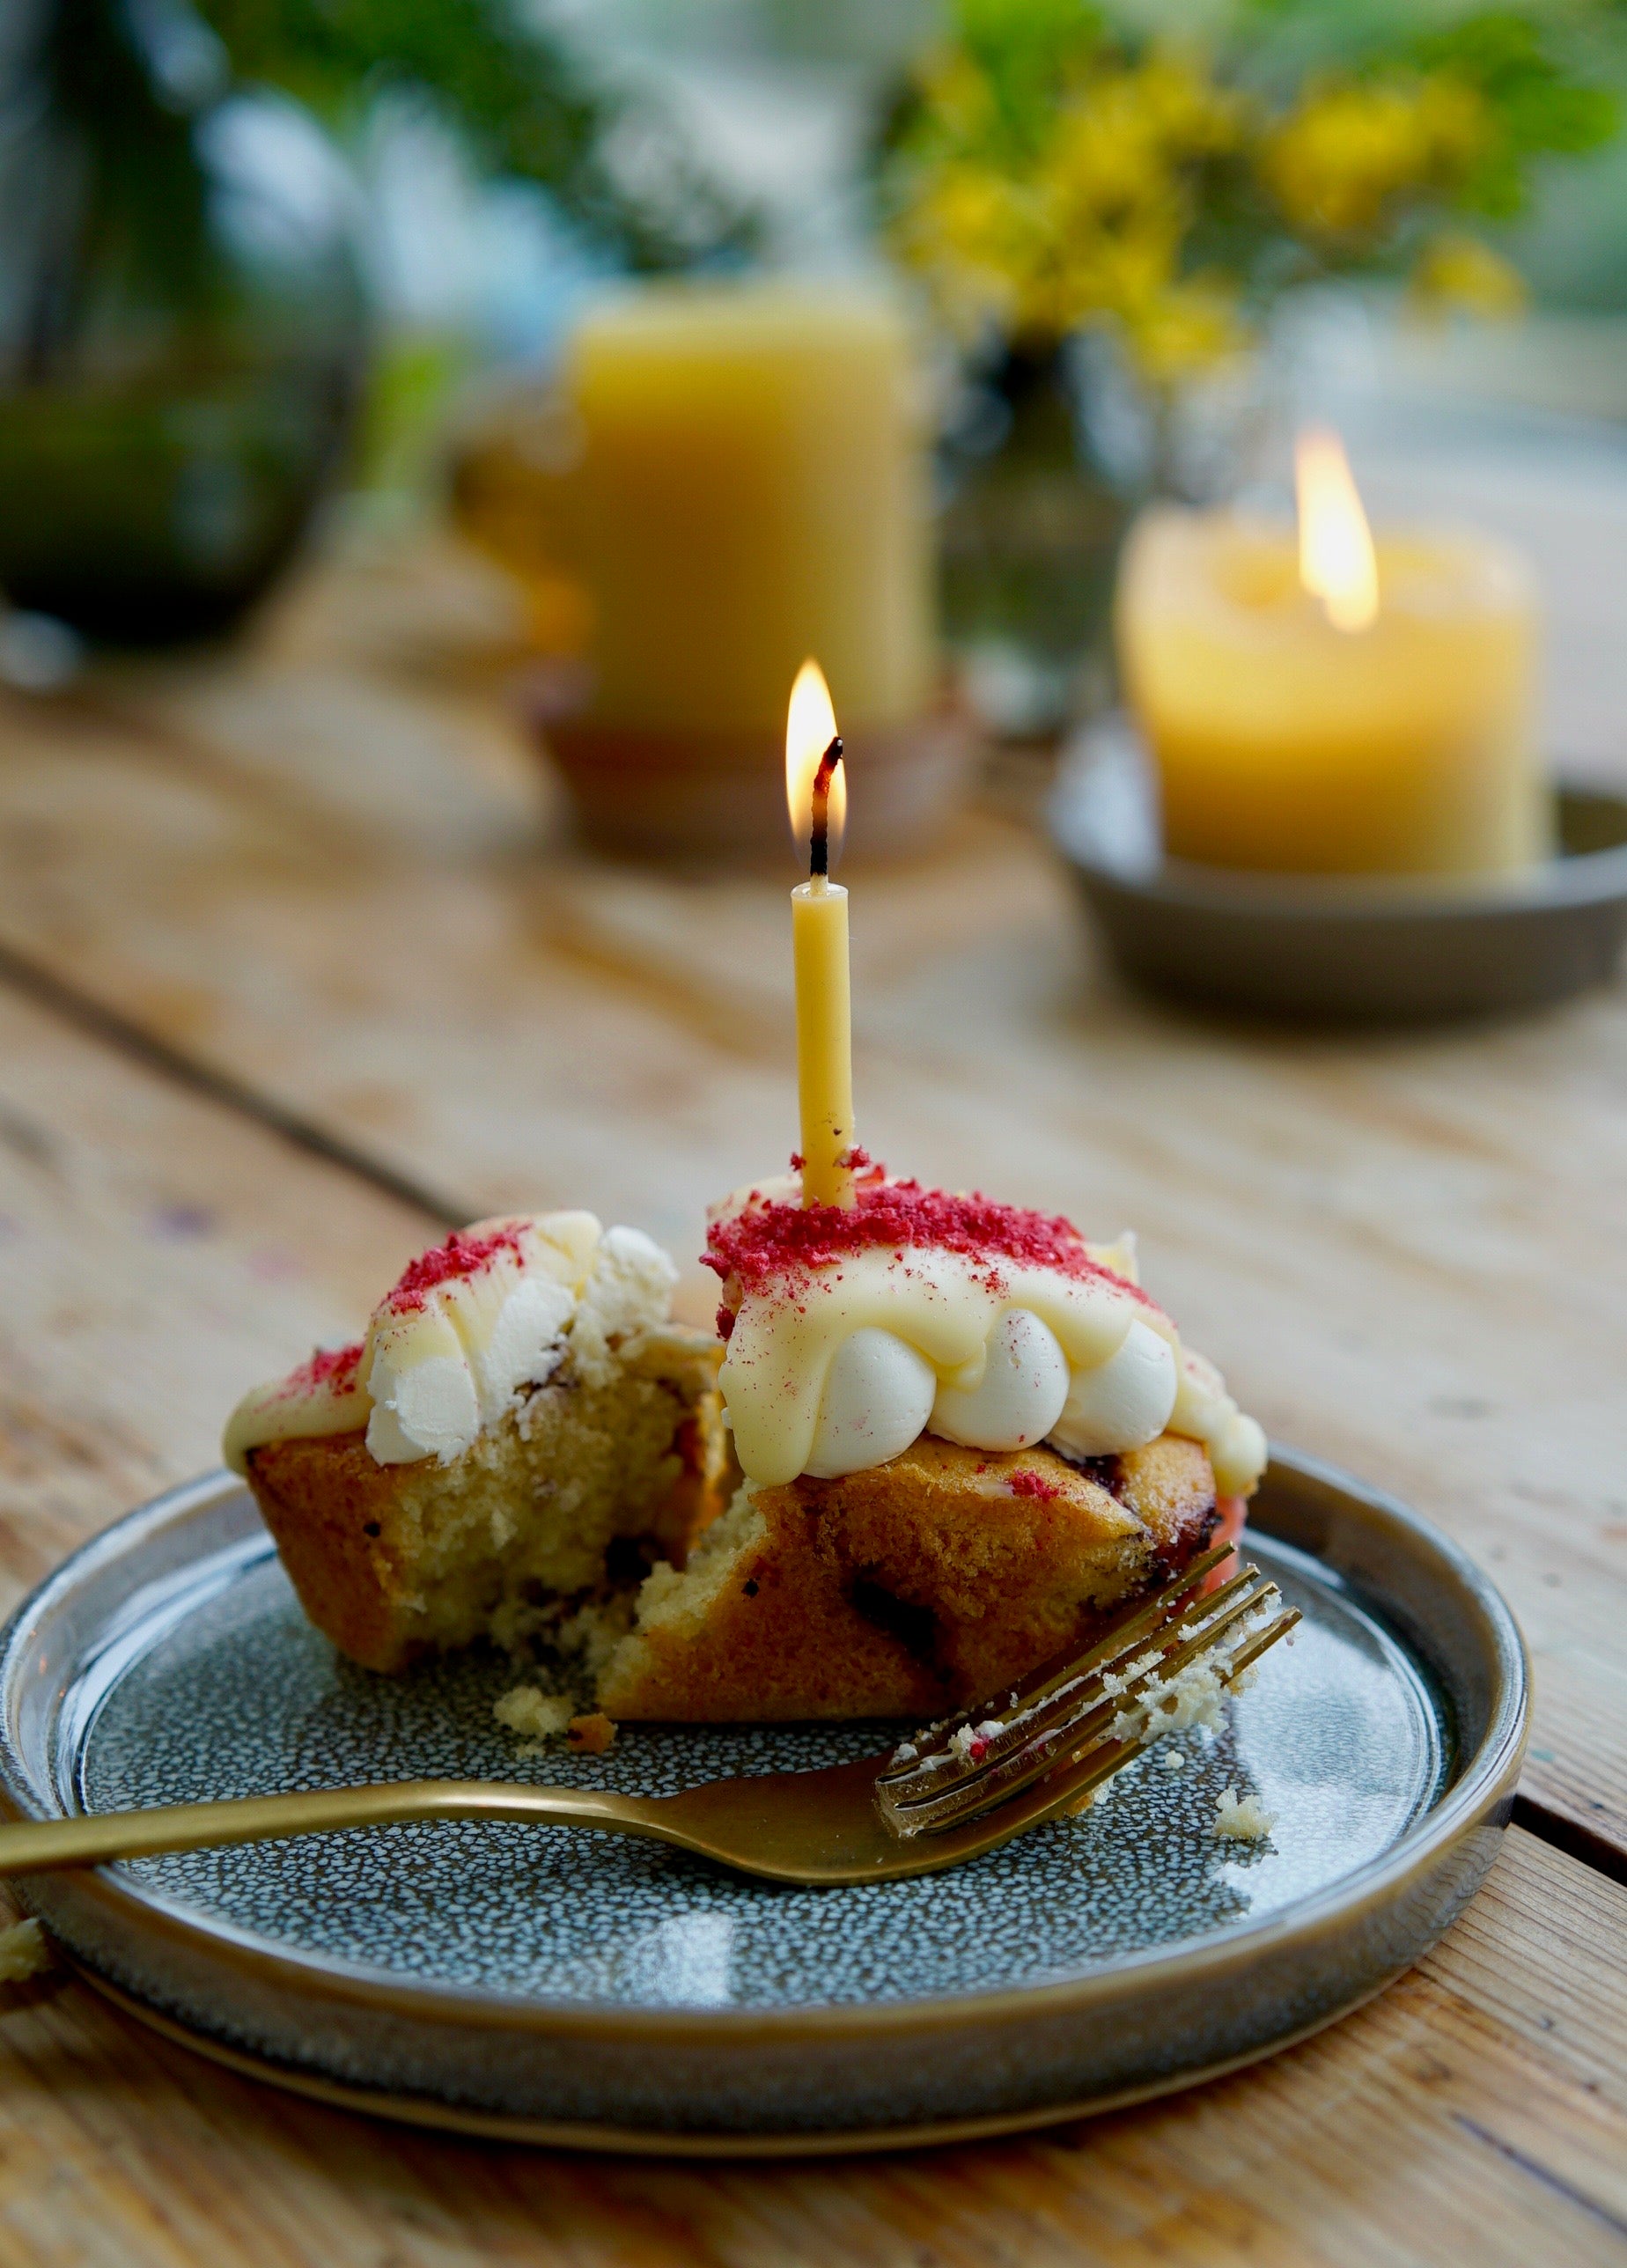 An image of a woodtown studio bee happy beeswax candle lit atop an iced cake on a plate with a bronze fork, all sitting on a wooden table